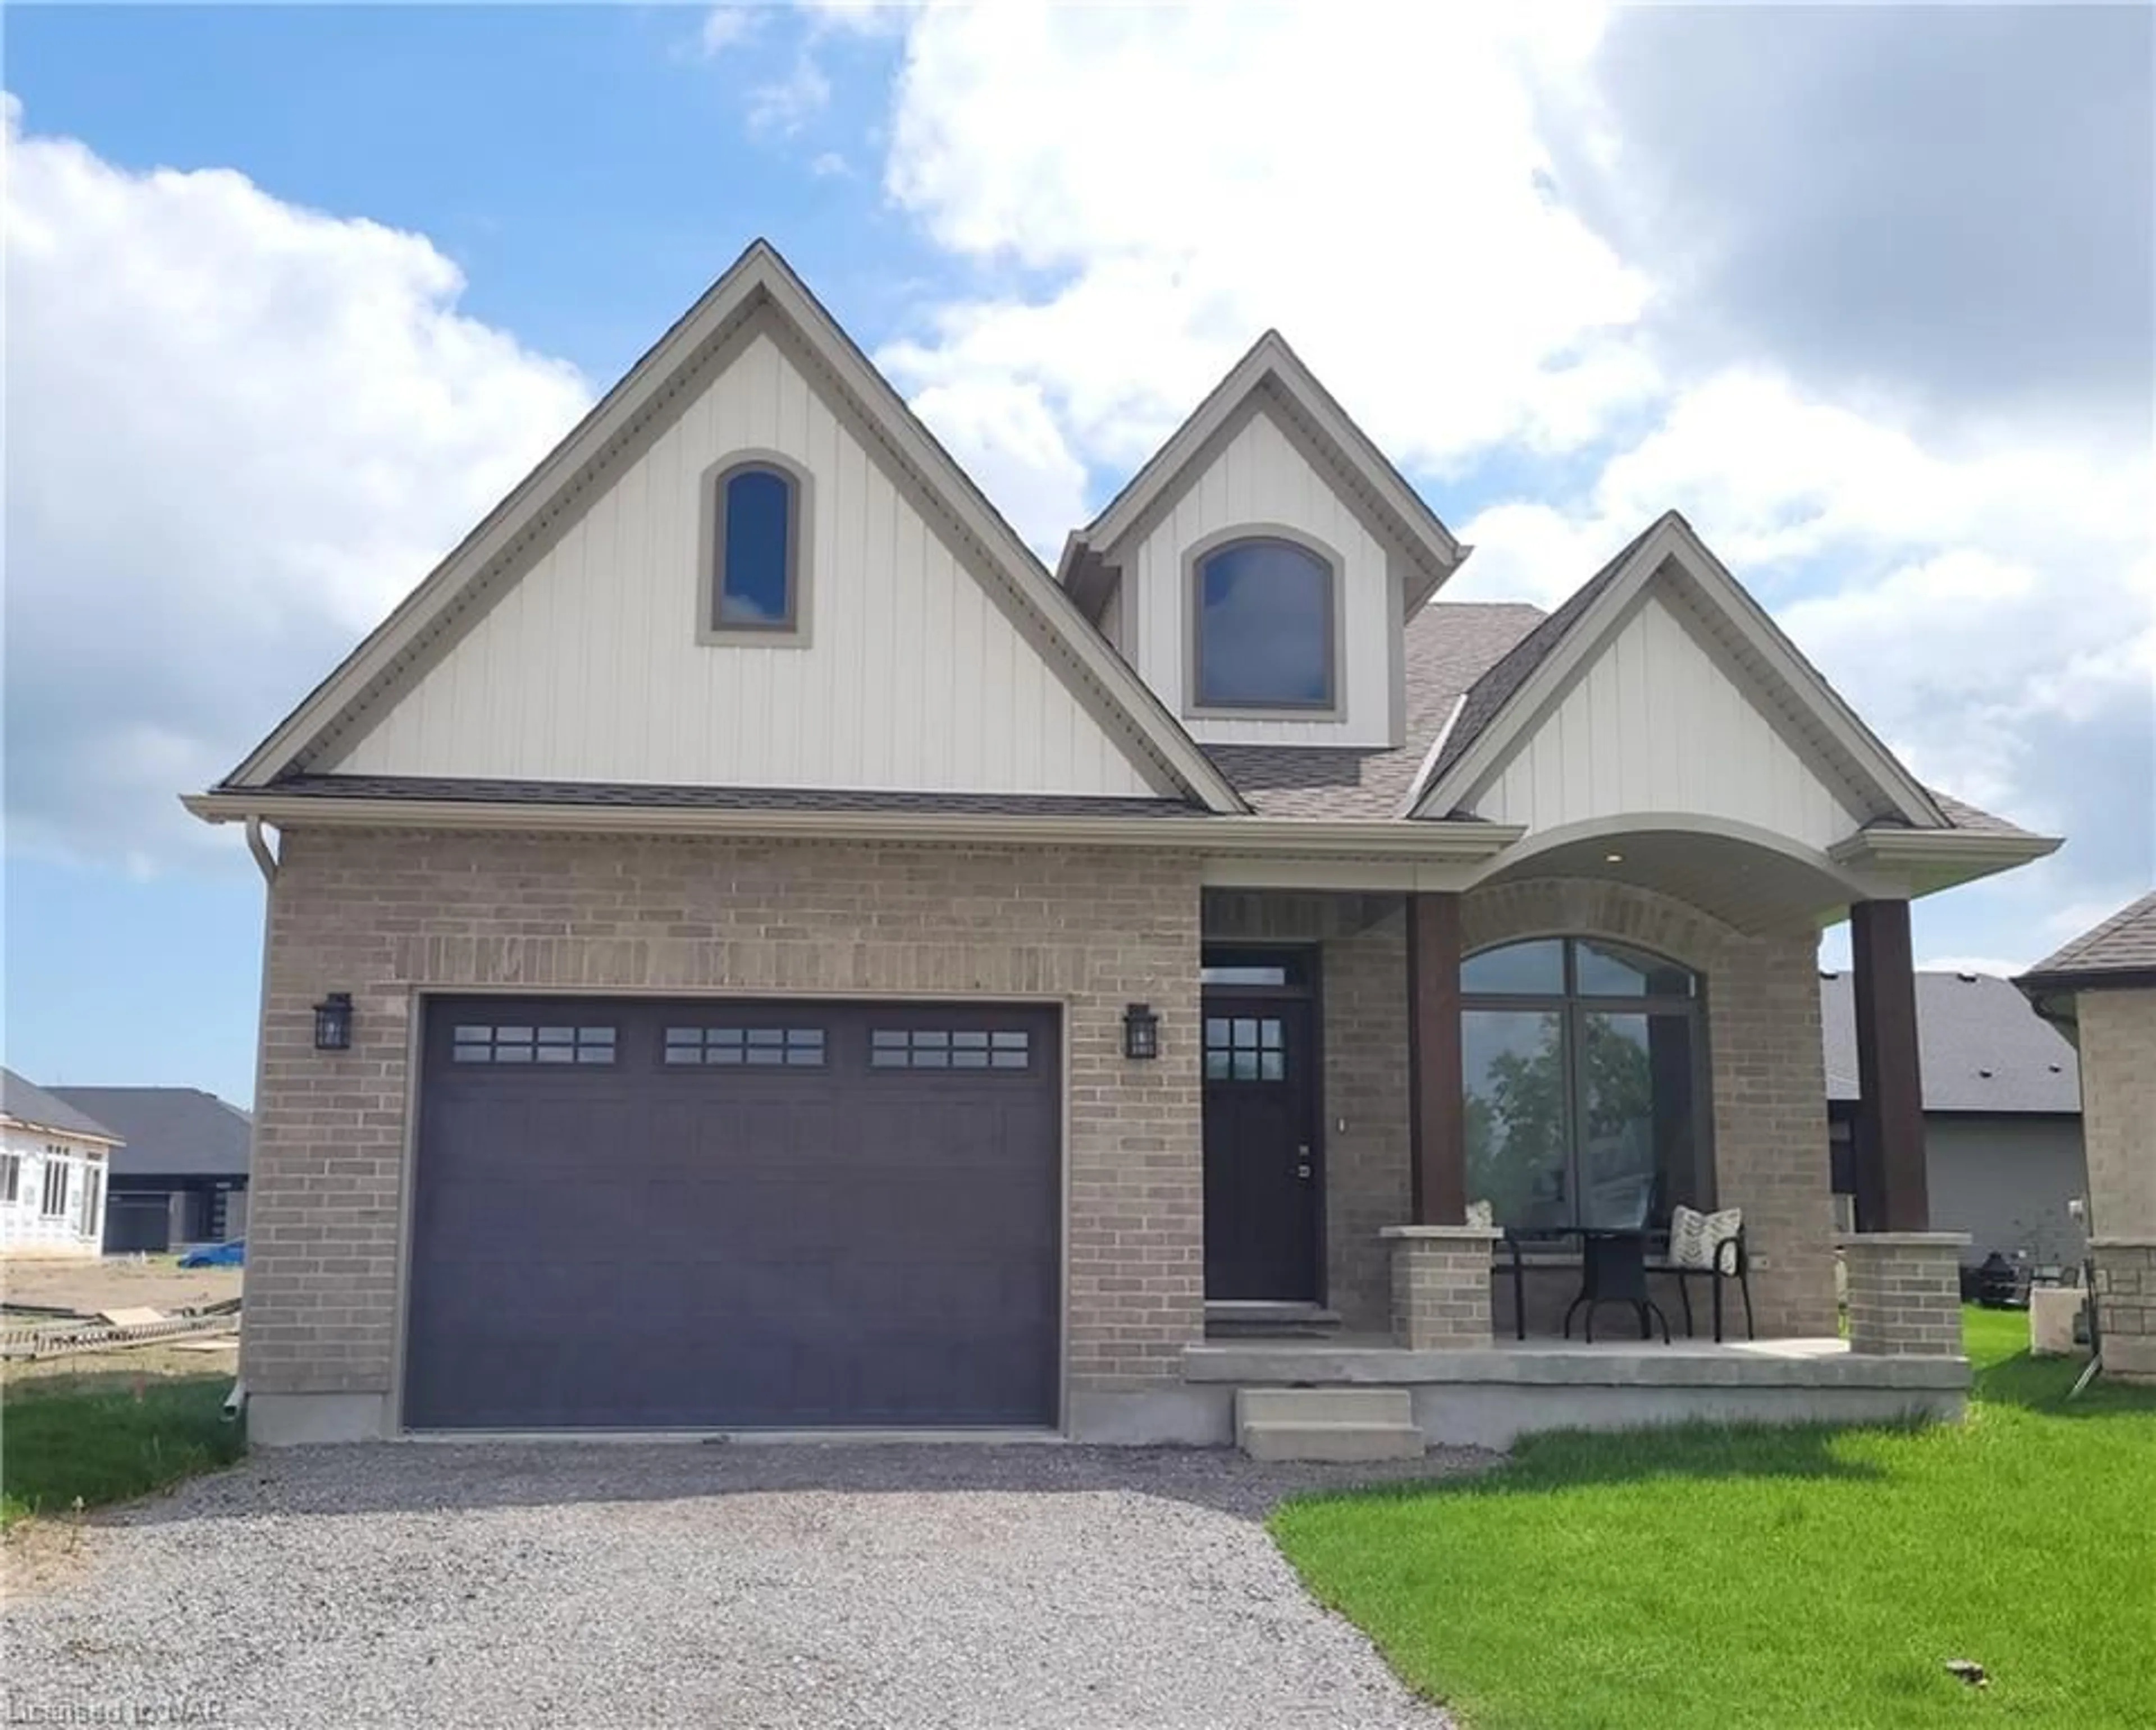 Home with brick exterior material for 4213 Village Creek Dr, Stevensville Ontario L0S 1S0